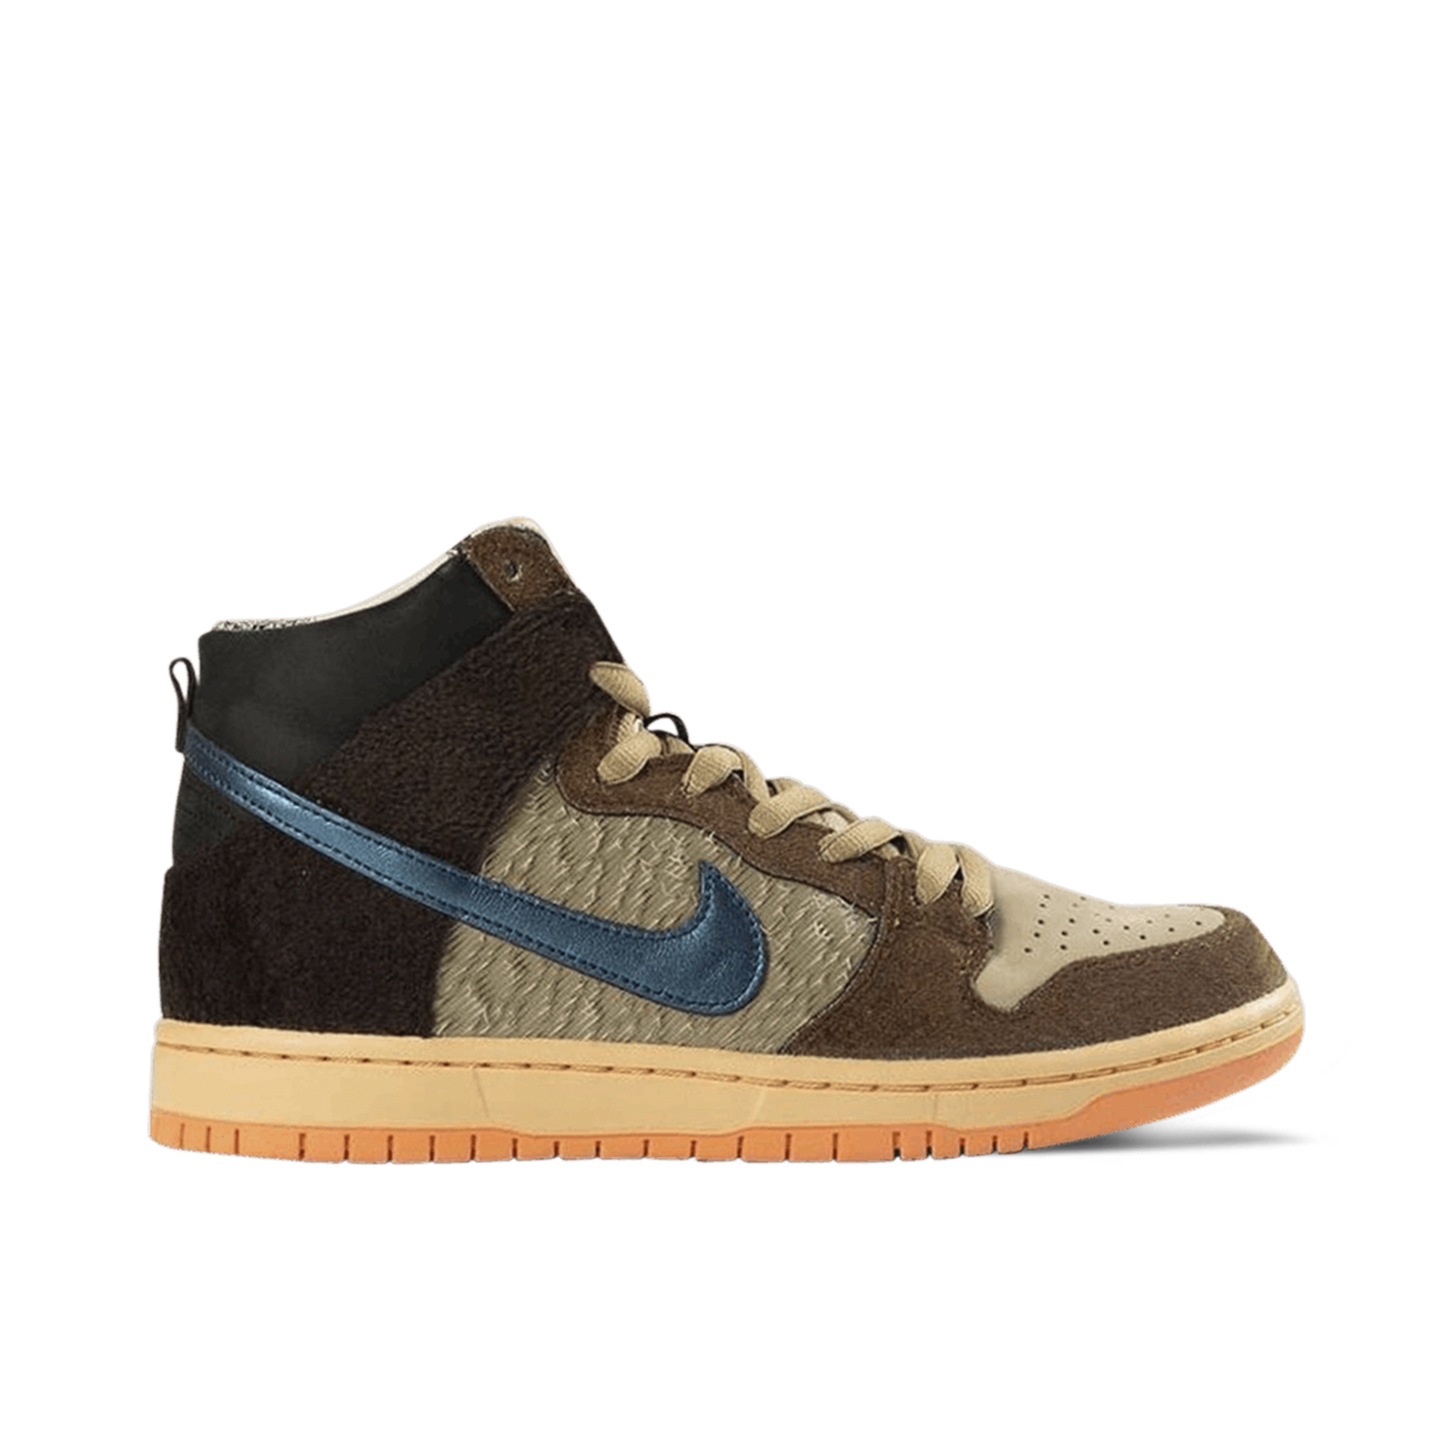 Nike Dunk Low Cider PRM | DH0601-001 | Laced